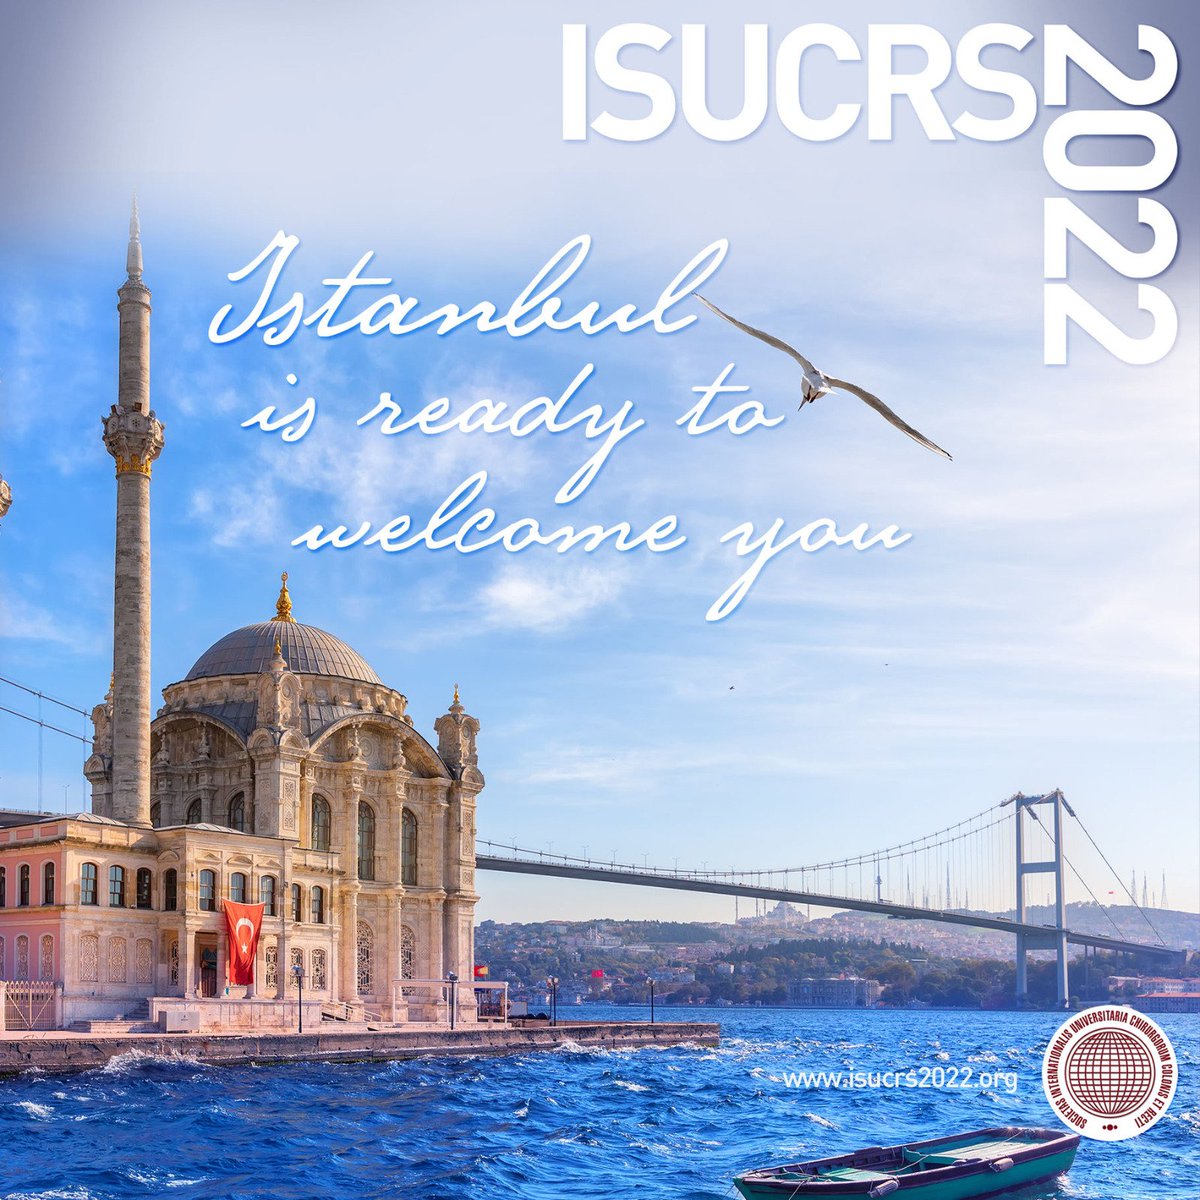 İstanbul is ready to welcome you! #isucrs #isucrs2022 #isucrsistanbul